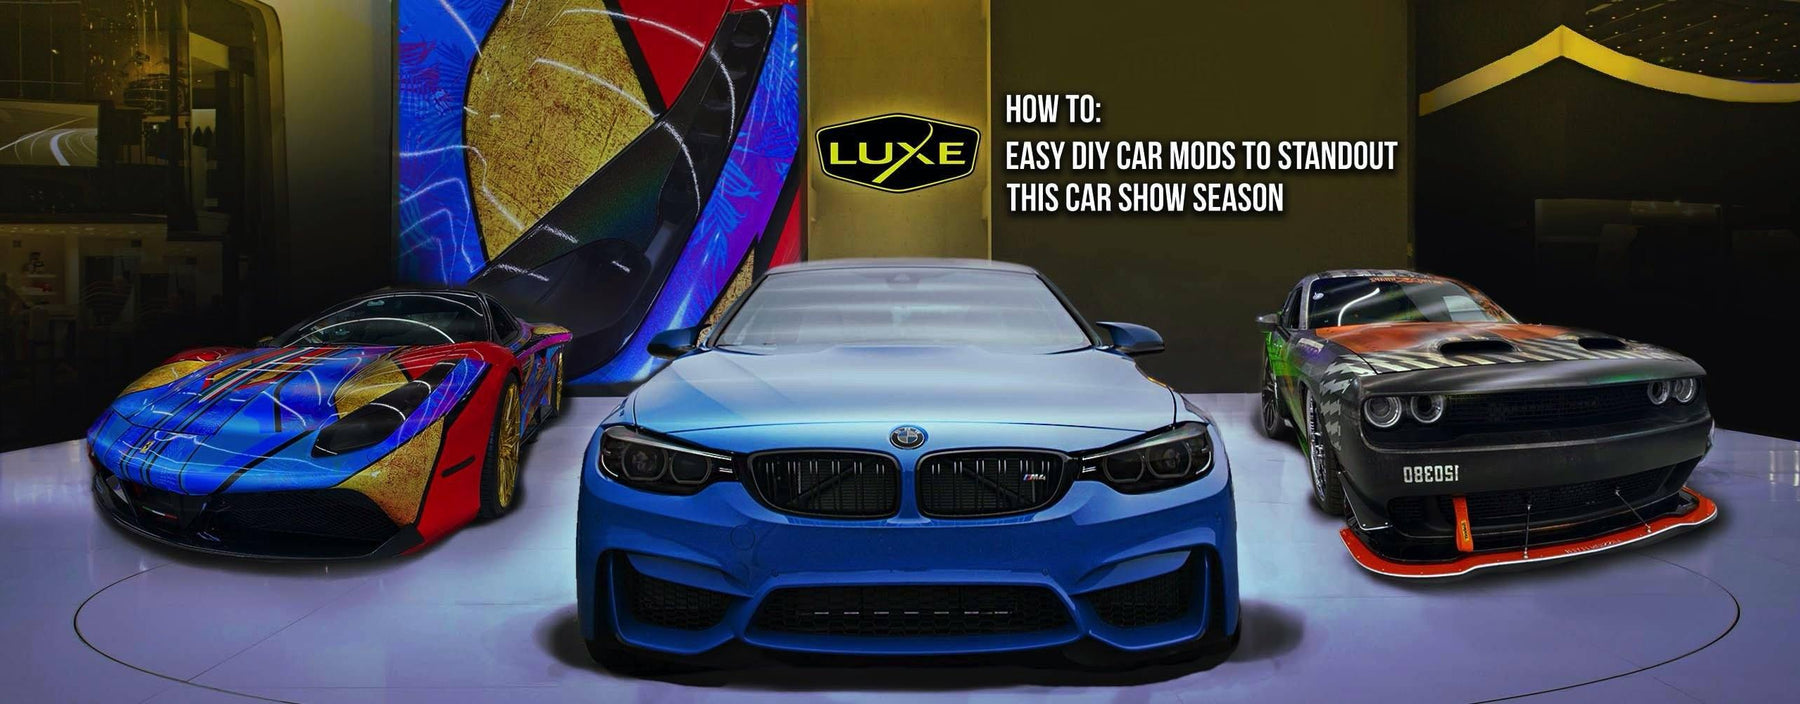 How To: Easy DIY Car Mods So You Stand Out This Car Show Season - Luxe Auto Concepts